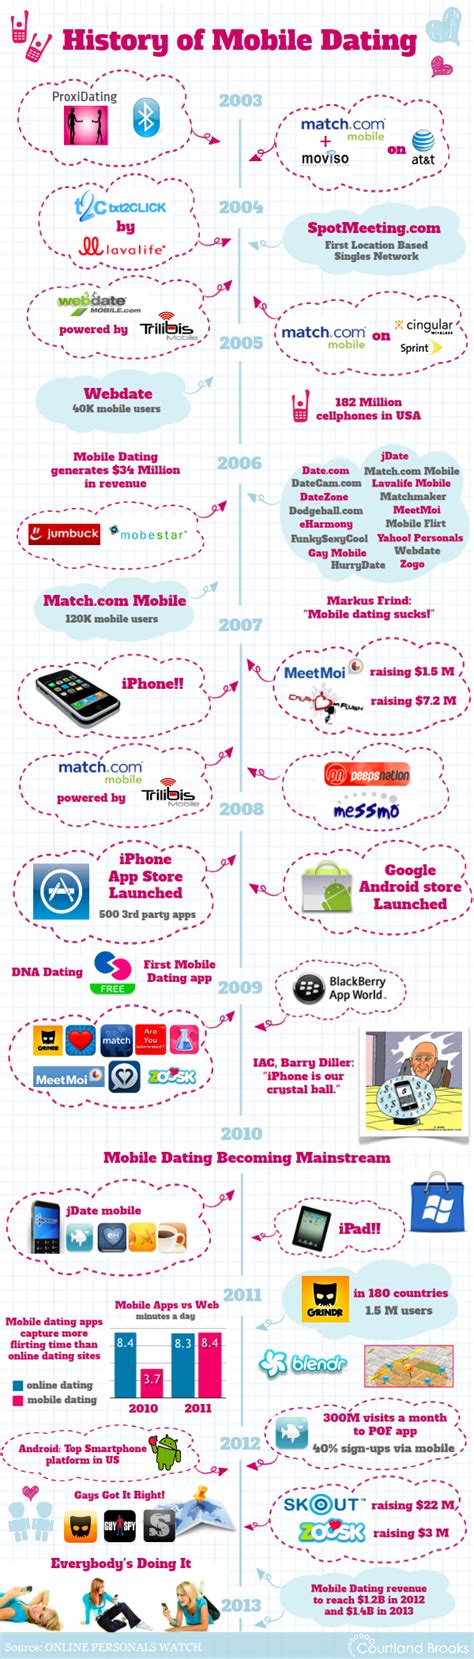 Internet dating, virtual dating can be abbreviated as online dating. Infographic - The History Of Mobile Dating - Online ...